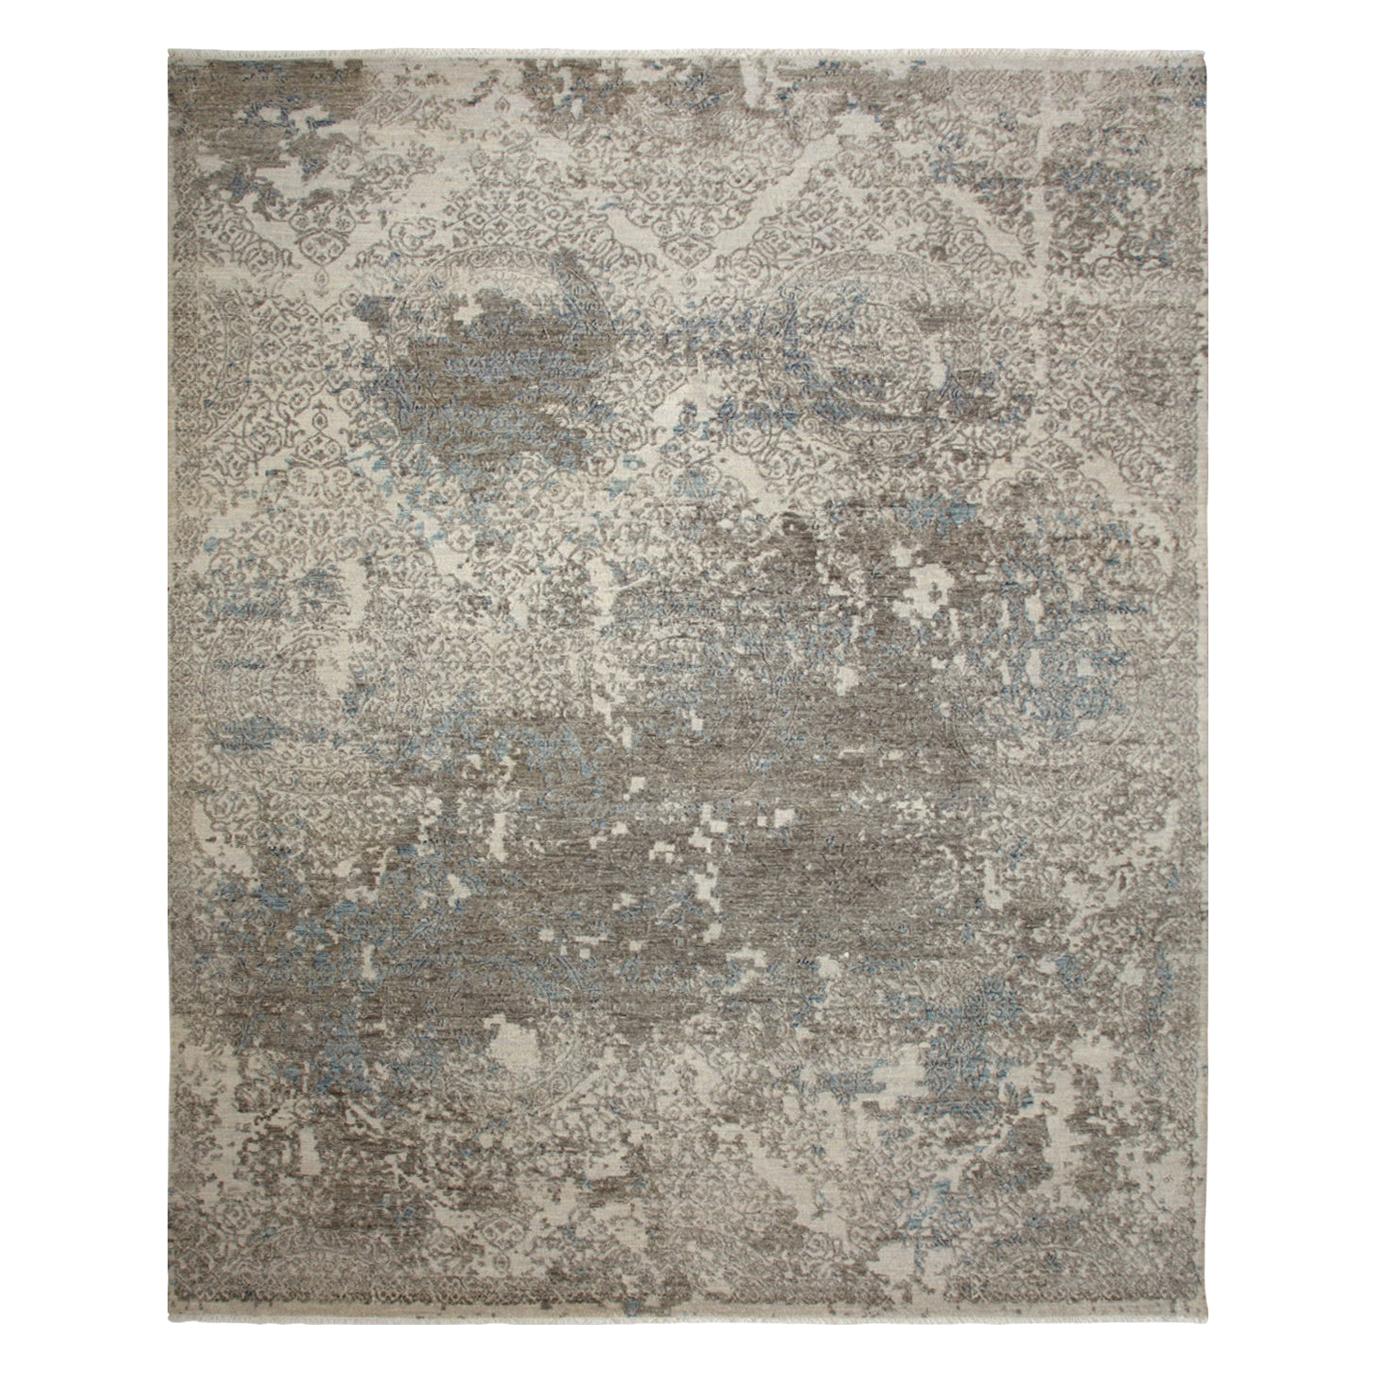 One-of-a-Kind Modern Wool Cotton Blend Hand-Knotted Area Rug, Taupe, 8'1 x 9'10